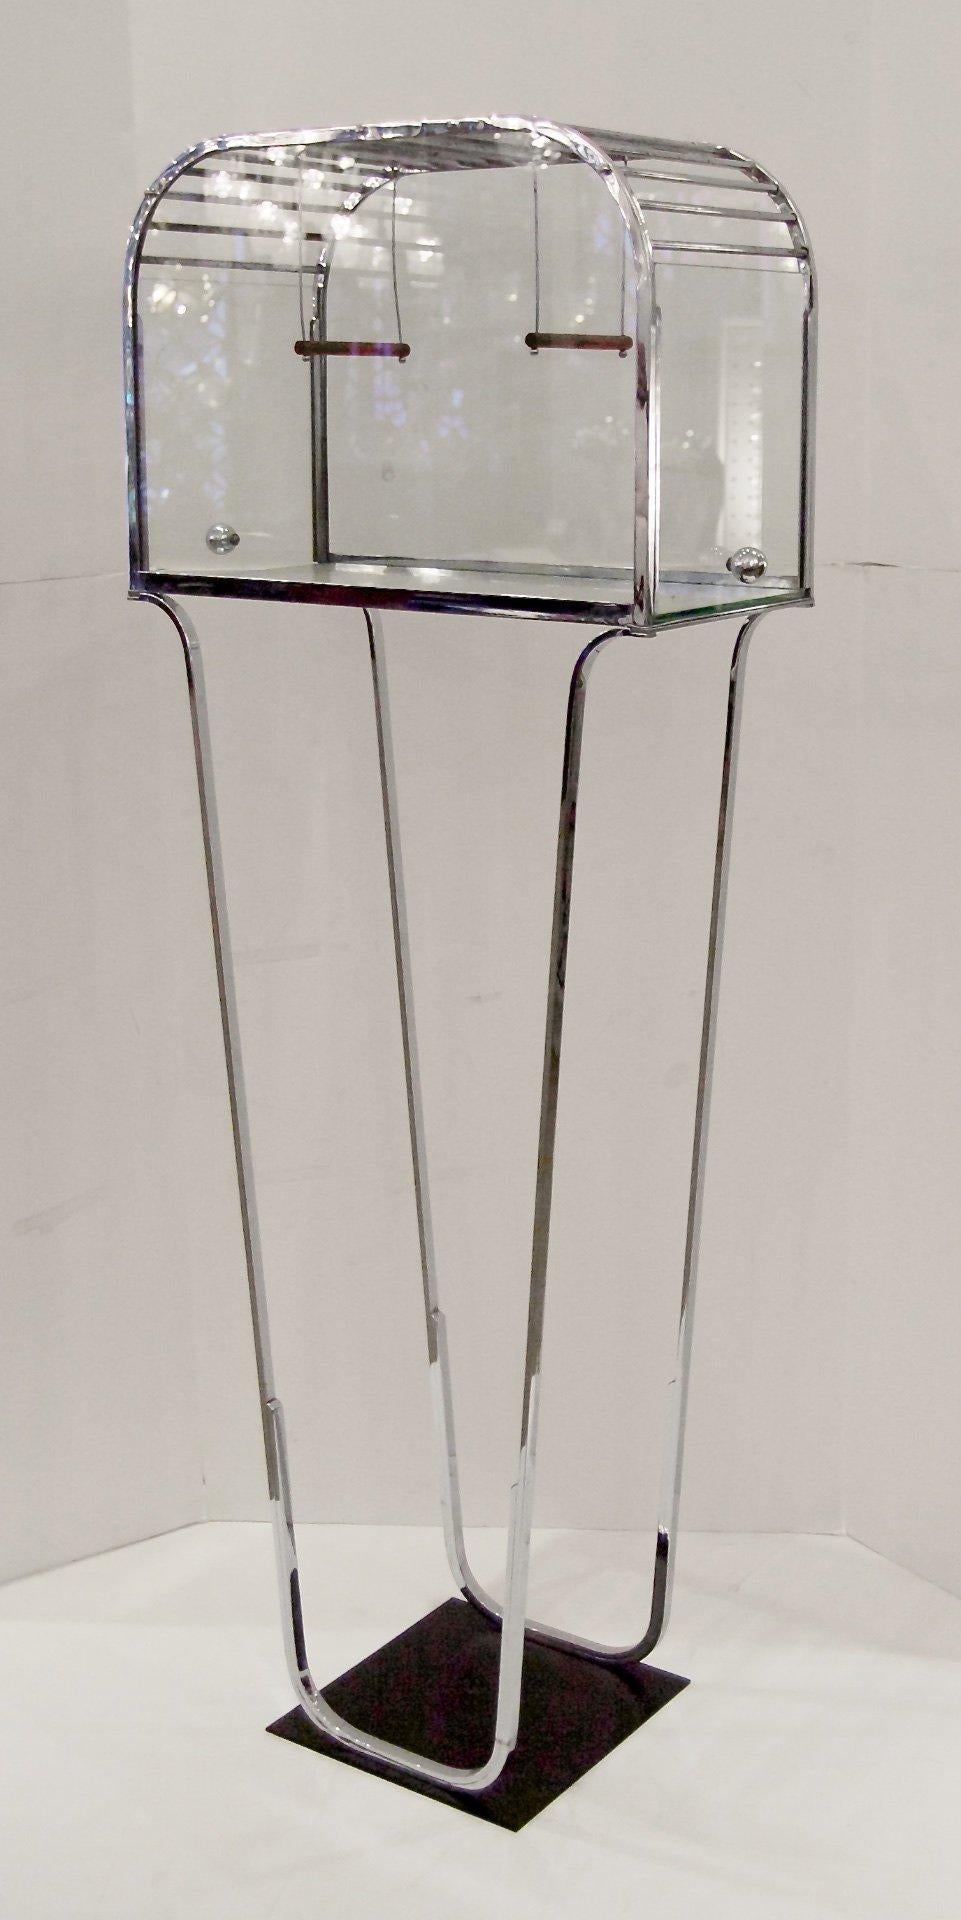 Unique glass and chrome birdcage in distinctive streamline Art Deco style is a whimsical decorative piece. With or without a bird, the piece has a small footprint with crisp chrome details and clear glass for display. Base is enameled black metal.